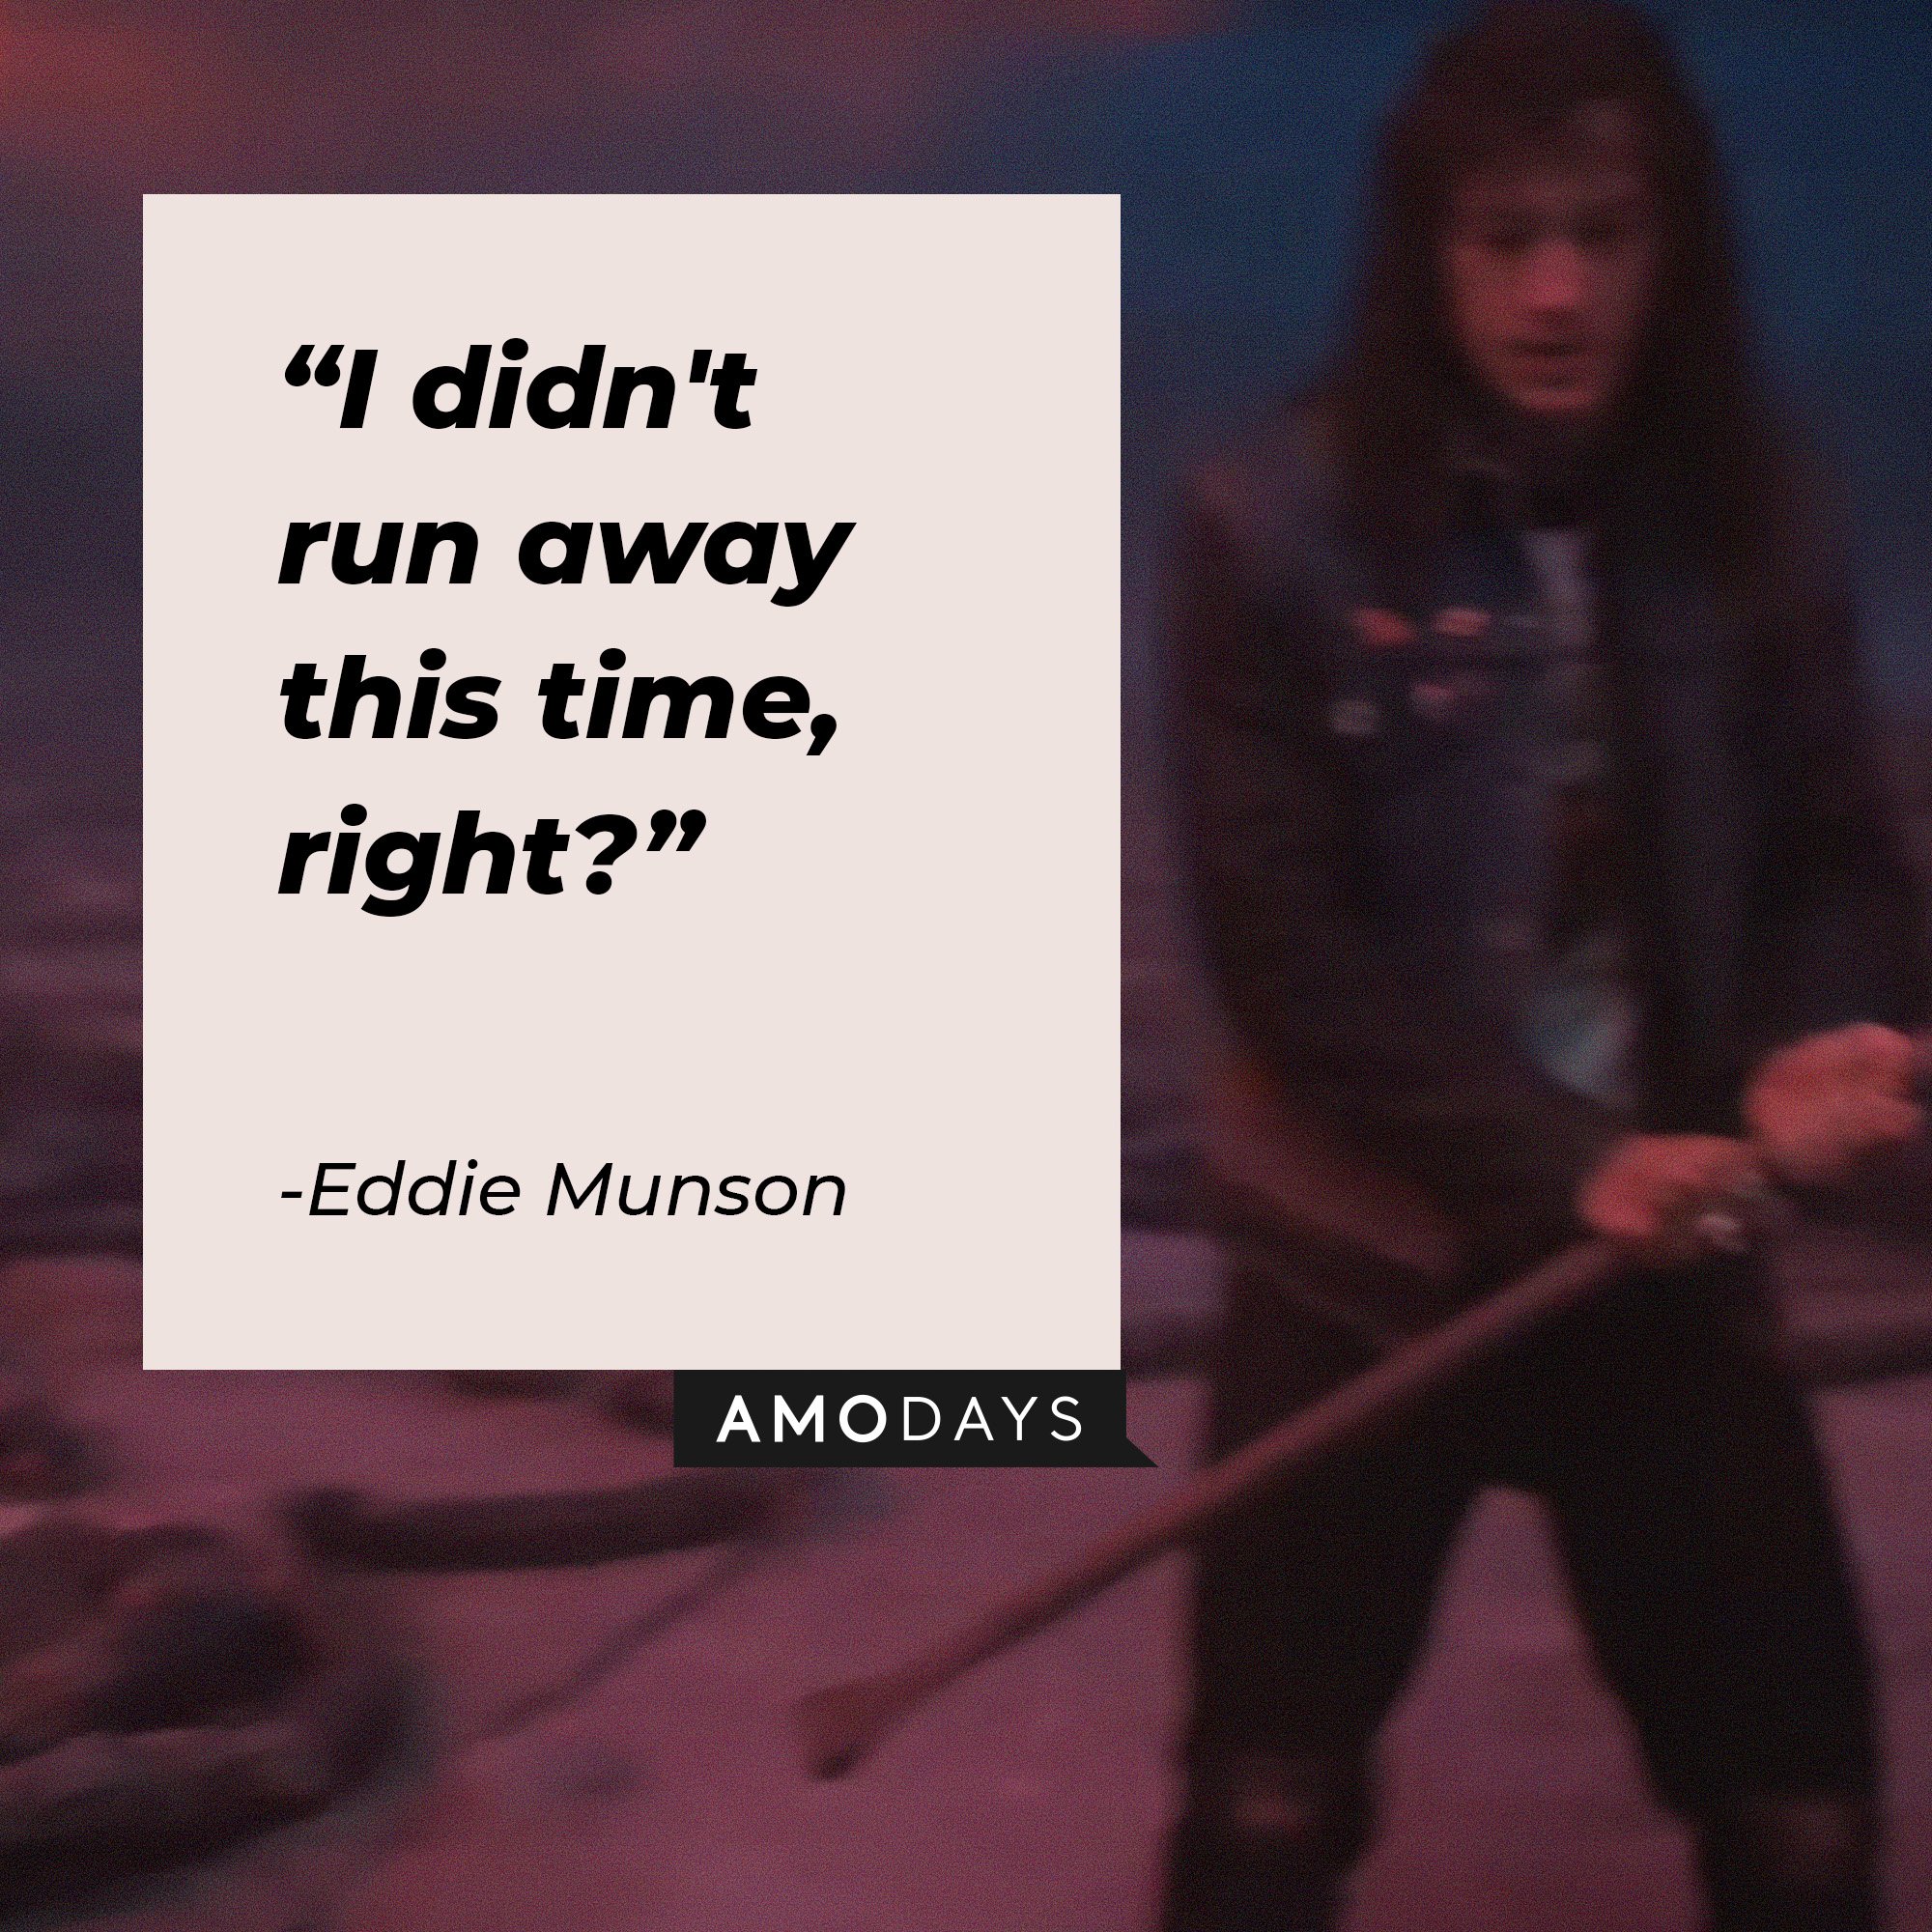 Eddie Munson’s quote: “I didn't run away this time, right?” | Image: AmoDays 